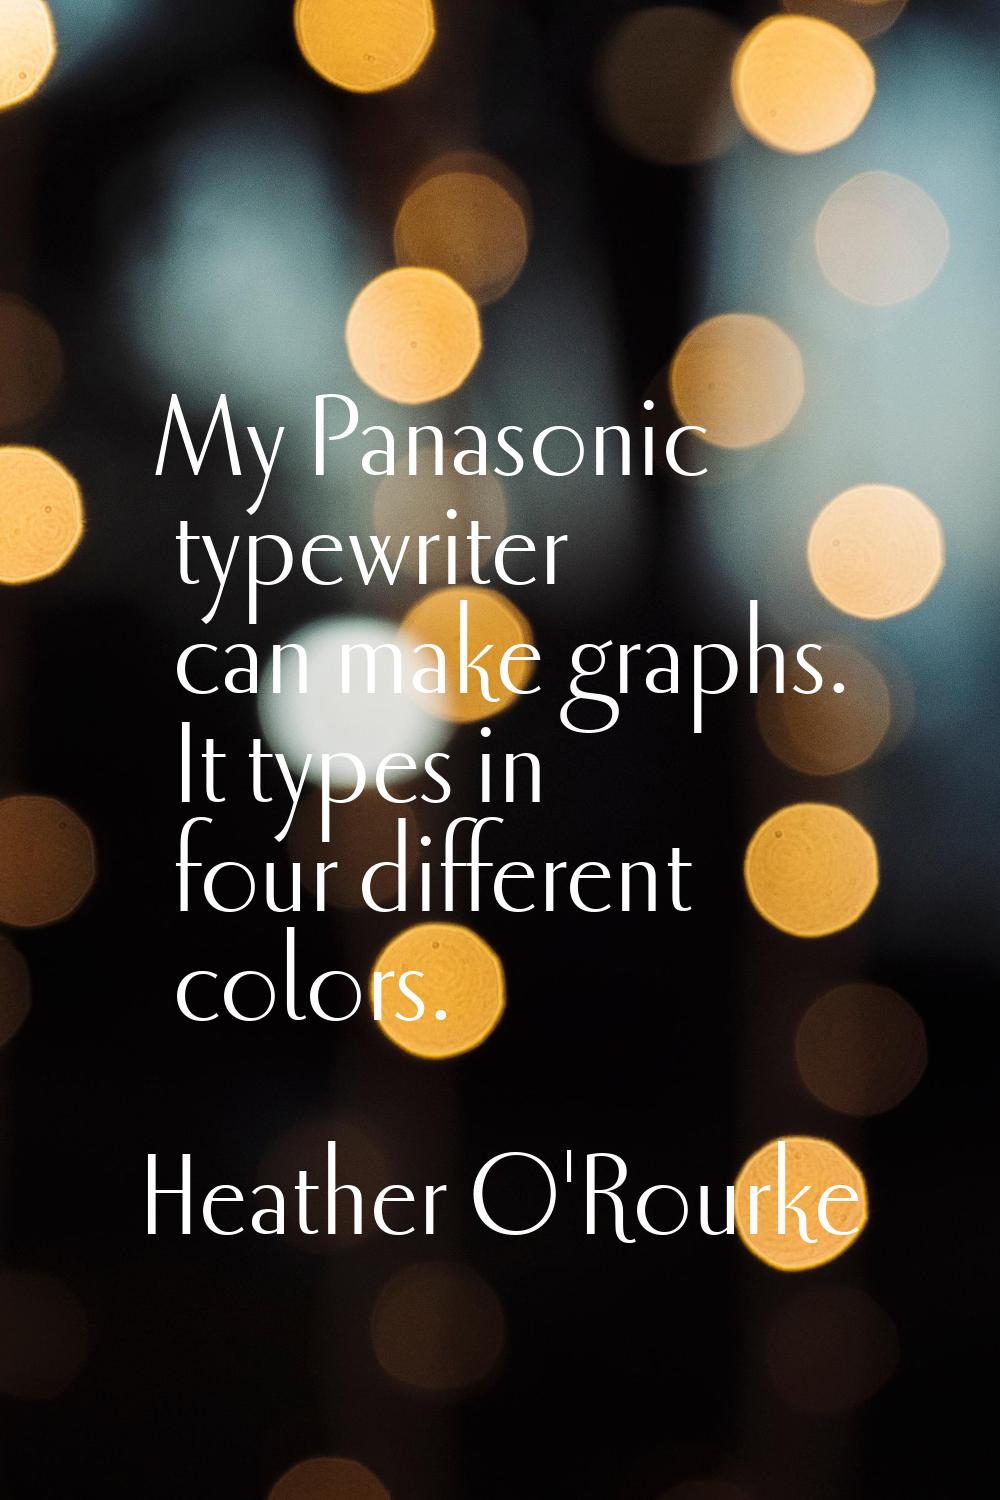 My Panasonic typewriter can make graphs. It types in four different colors.